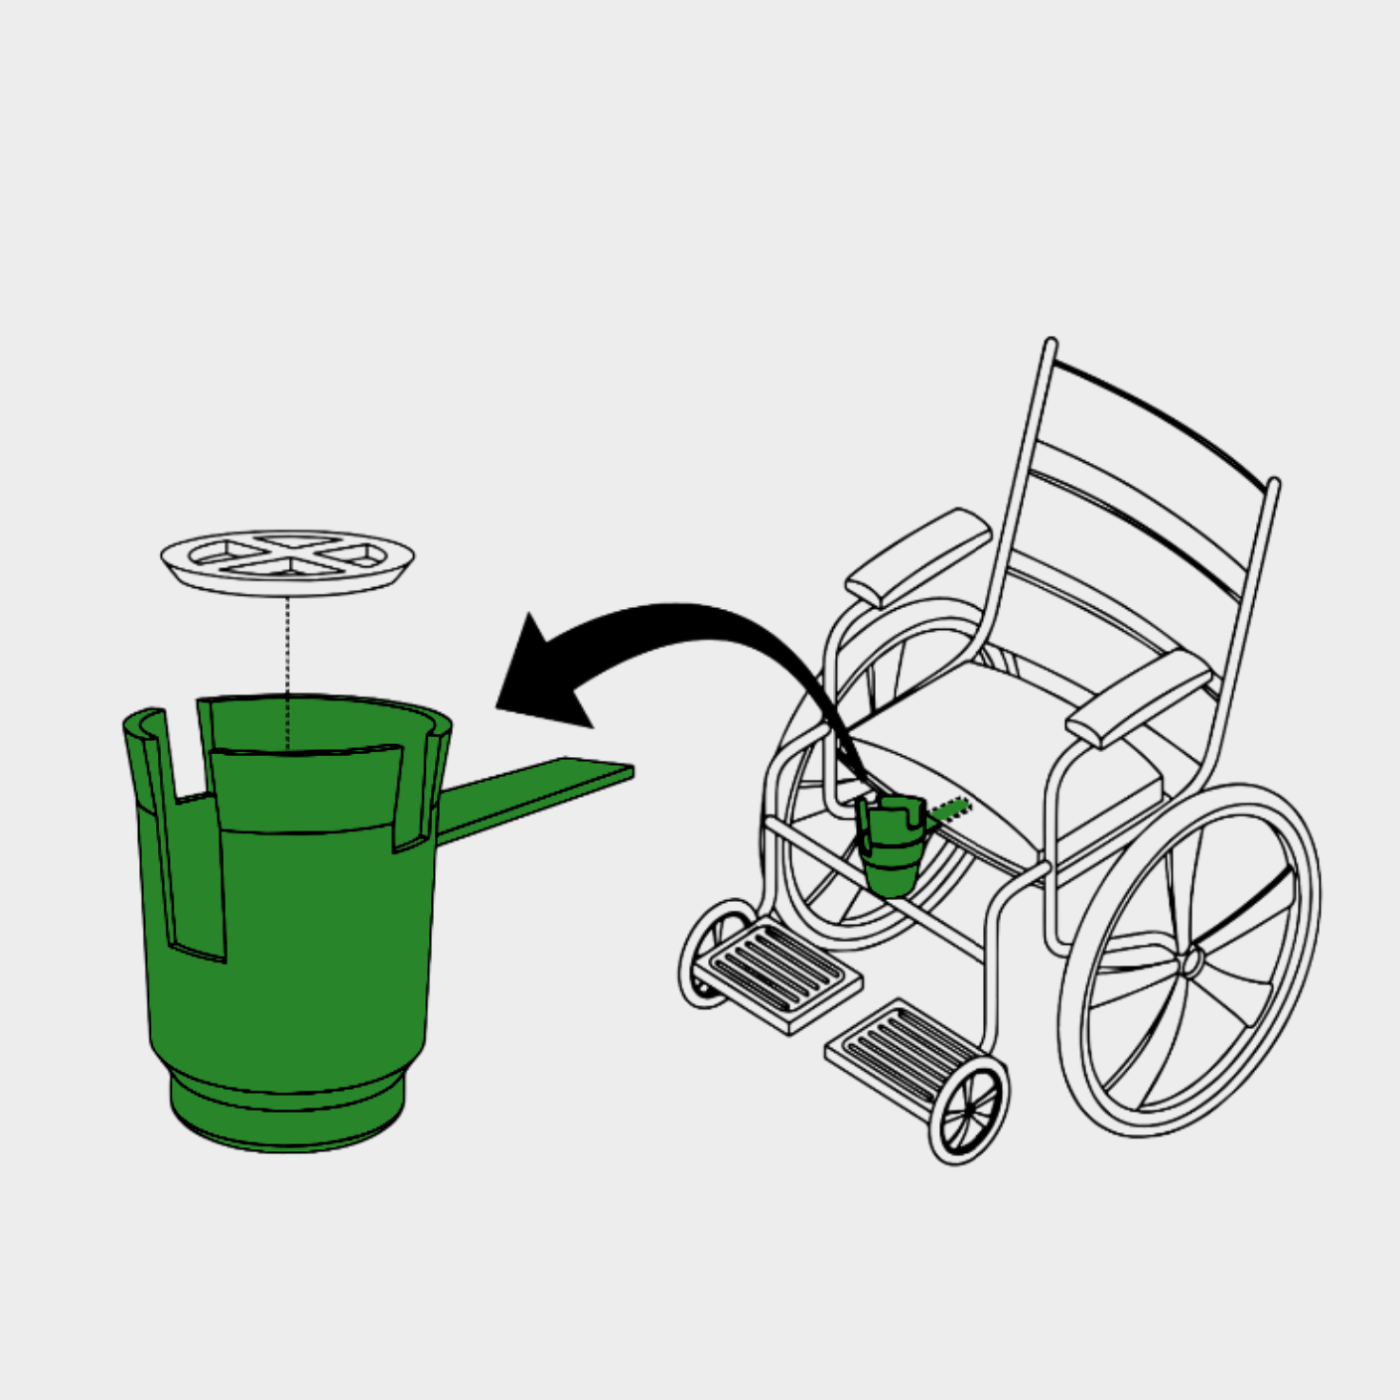 HandiCup line drawing. Insert arm of HandiCup under seat cushion of wheelchair for secure installation.